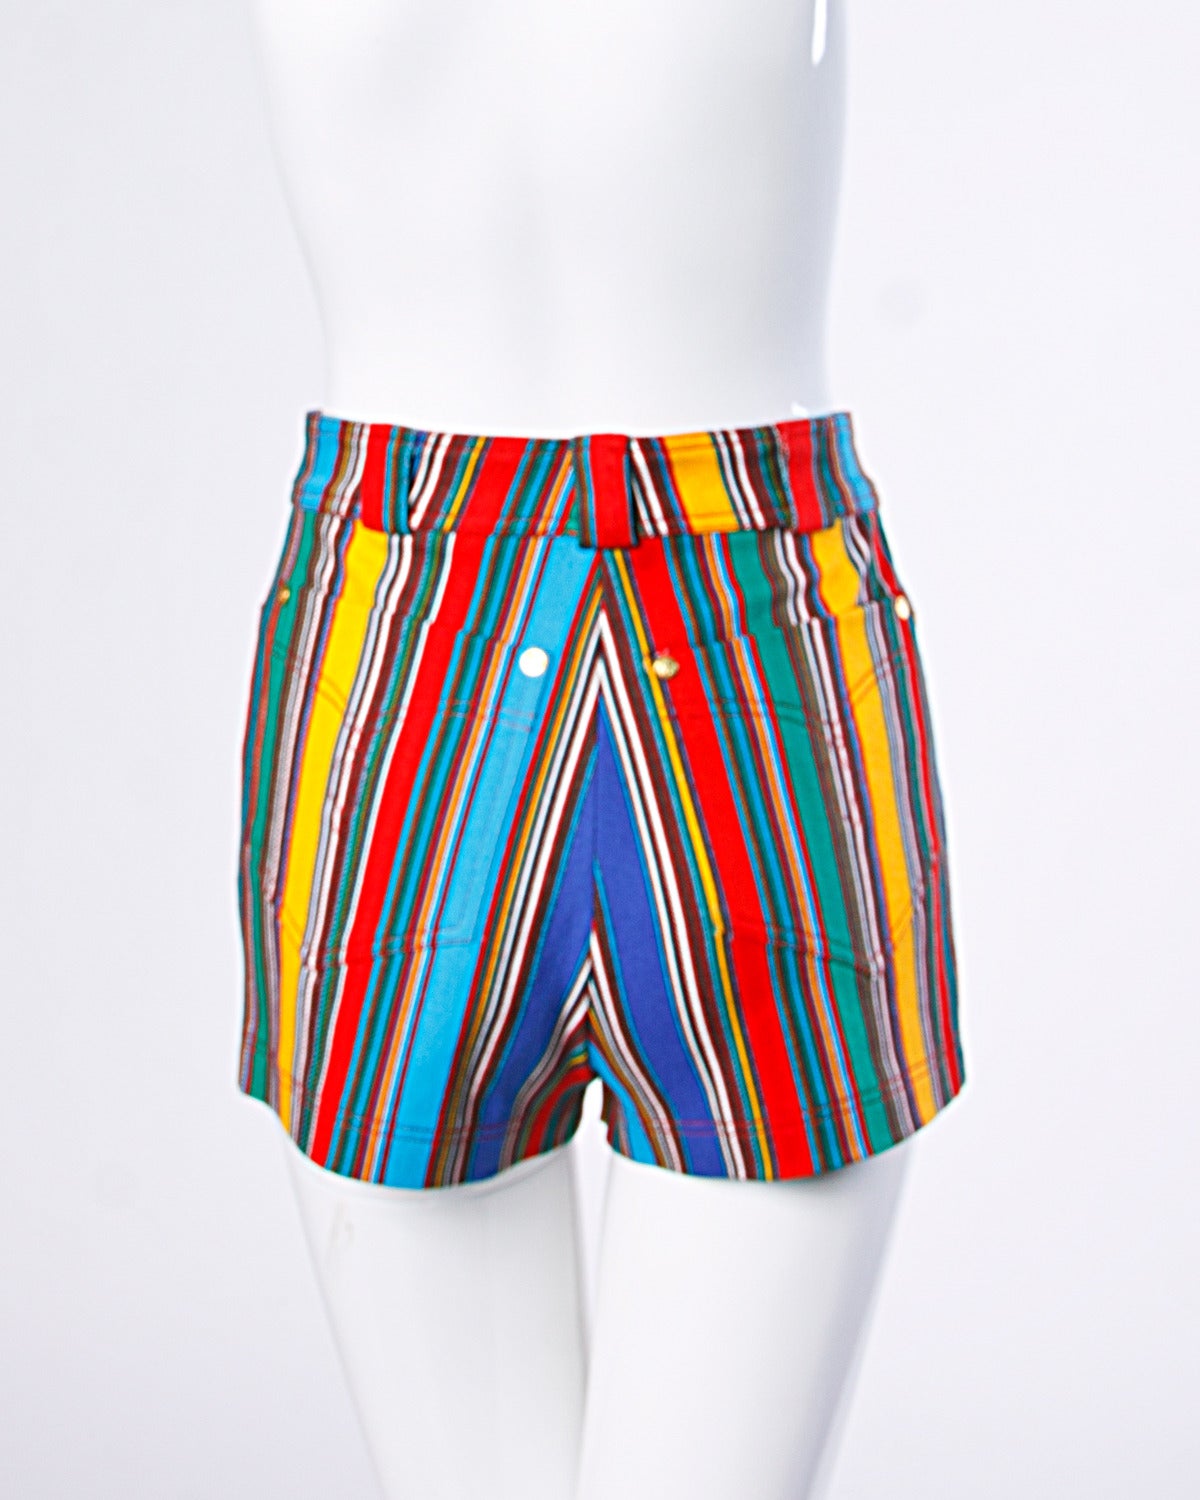 Colorful Gianni Versace Couture stretch denim striped shorts with a high waist and back pockets. Worn by Naomi Campbell in a 1993 ad campaign shot by Steven Meisel!

Details:

Partially Lined
Front Pockets/ Back Pockets
Front Zip and Button